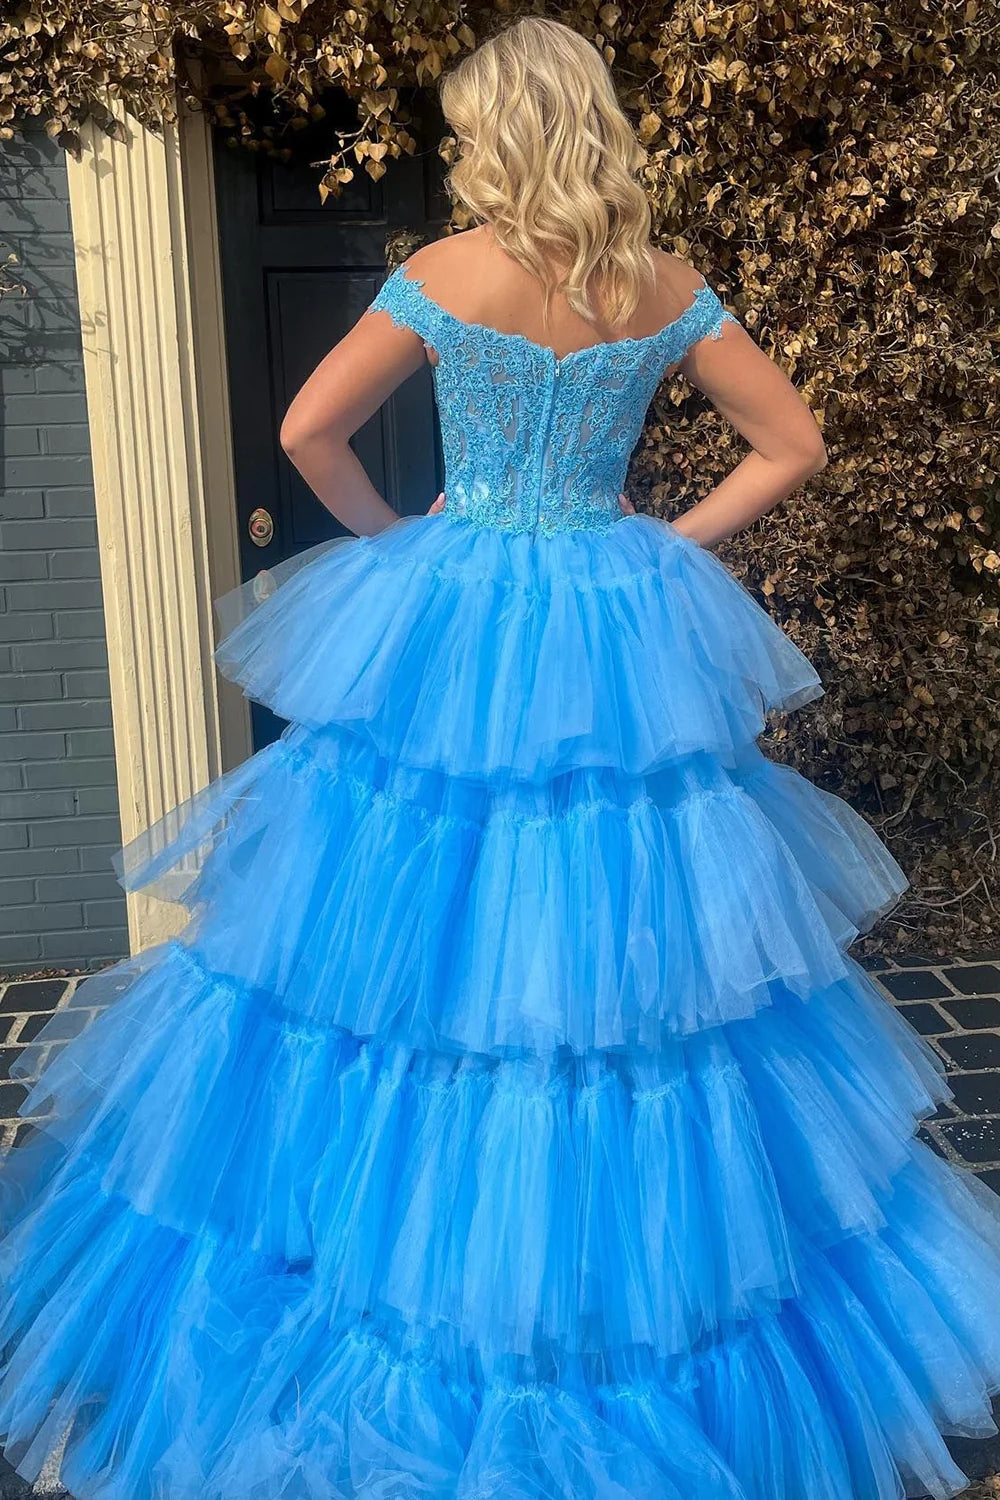 Bette | Blue High Low Homecoming Prom Dress with Lace